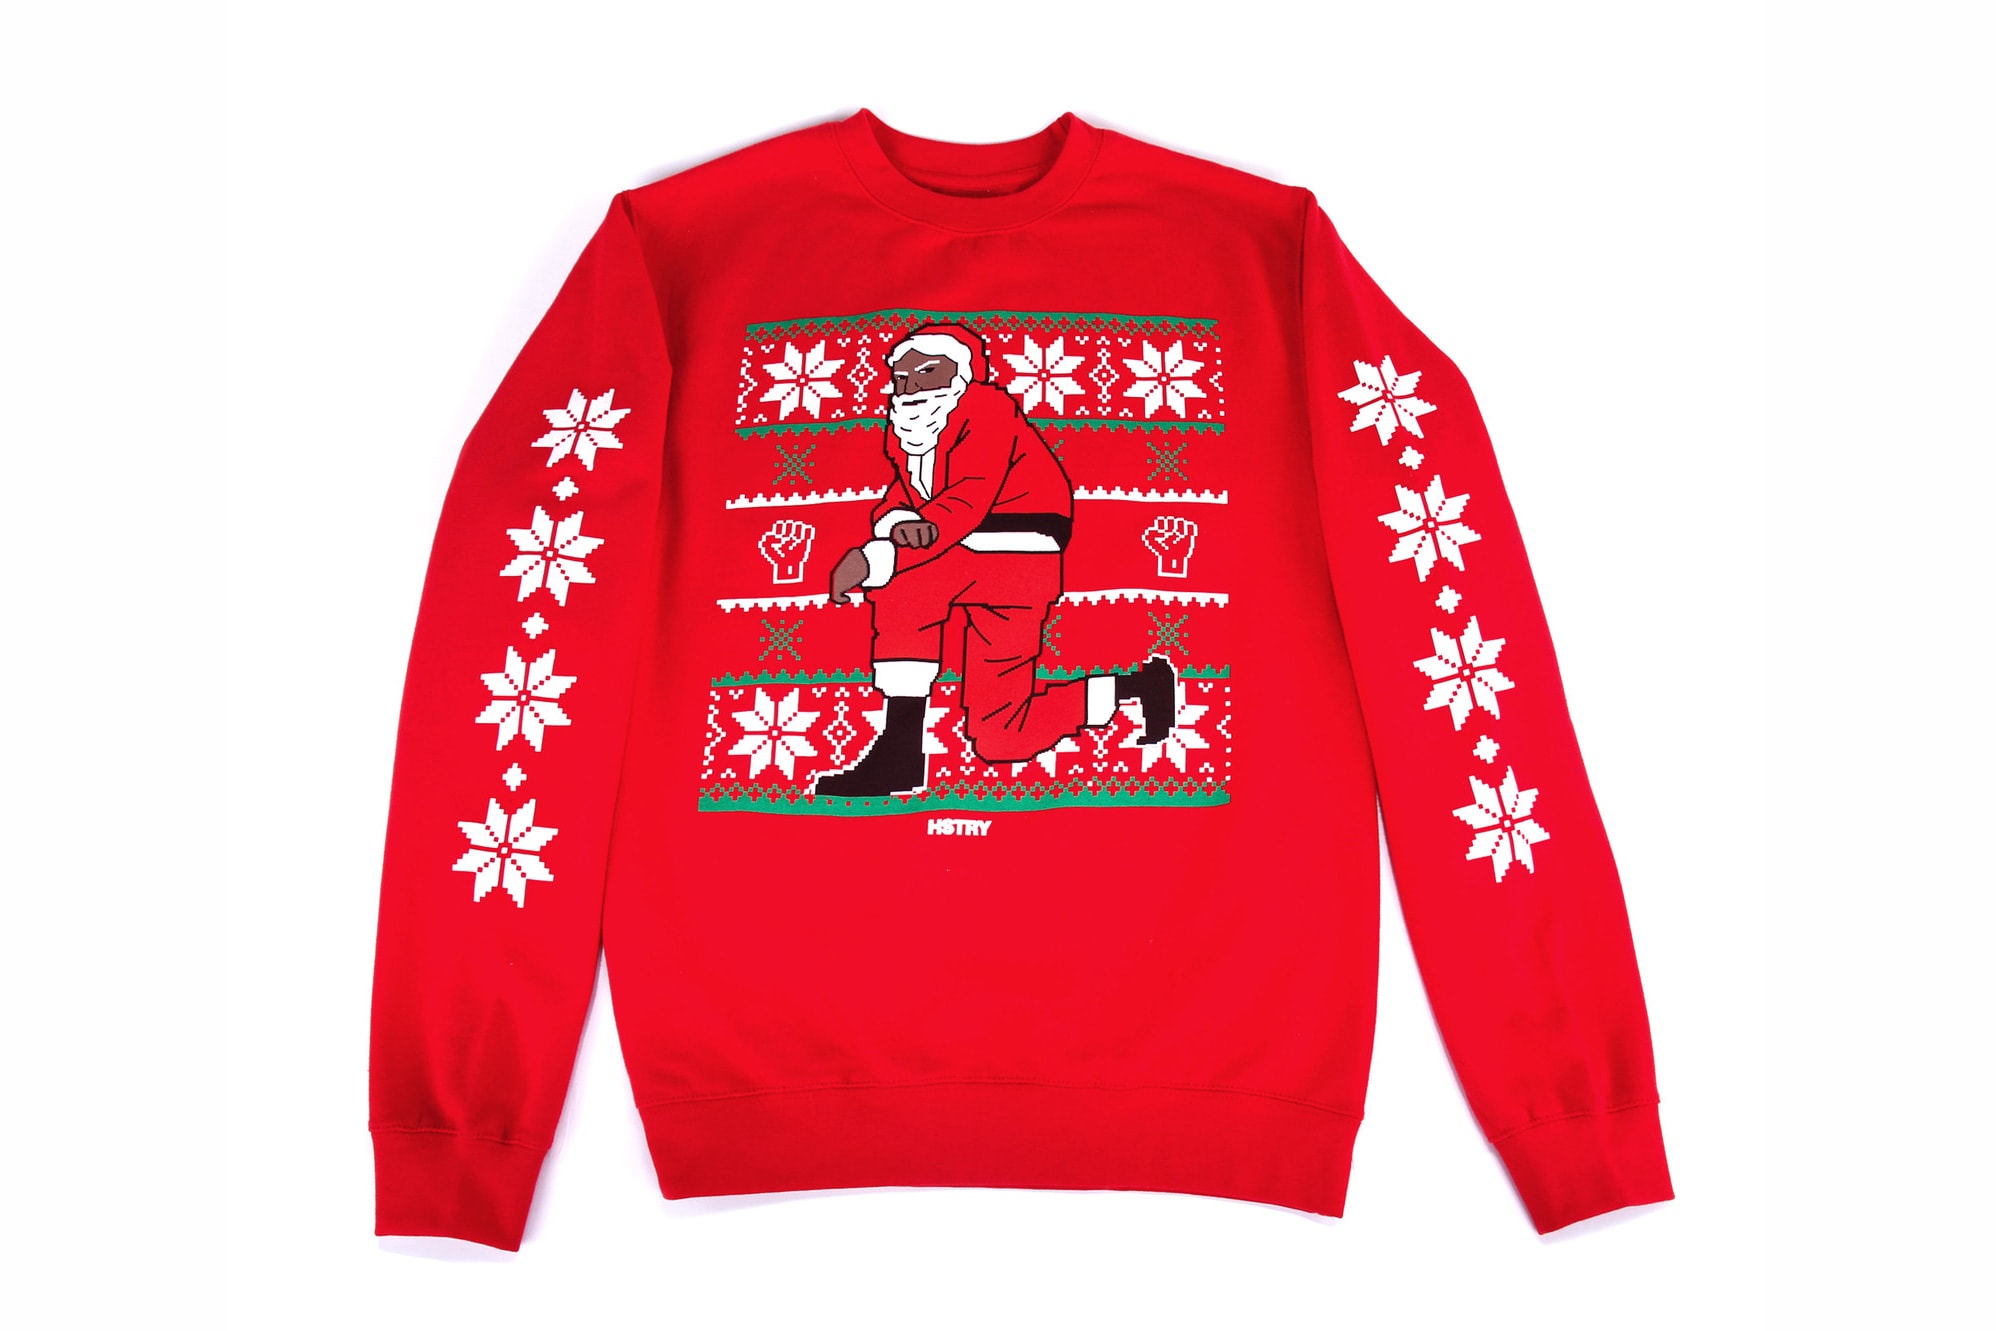 Nas Kneeling Santa 2016 Christmas Sweaters HSTRY The Center for Court Innovation